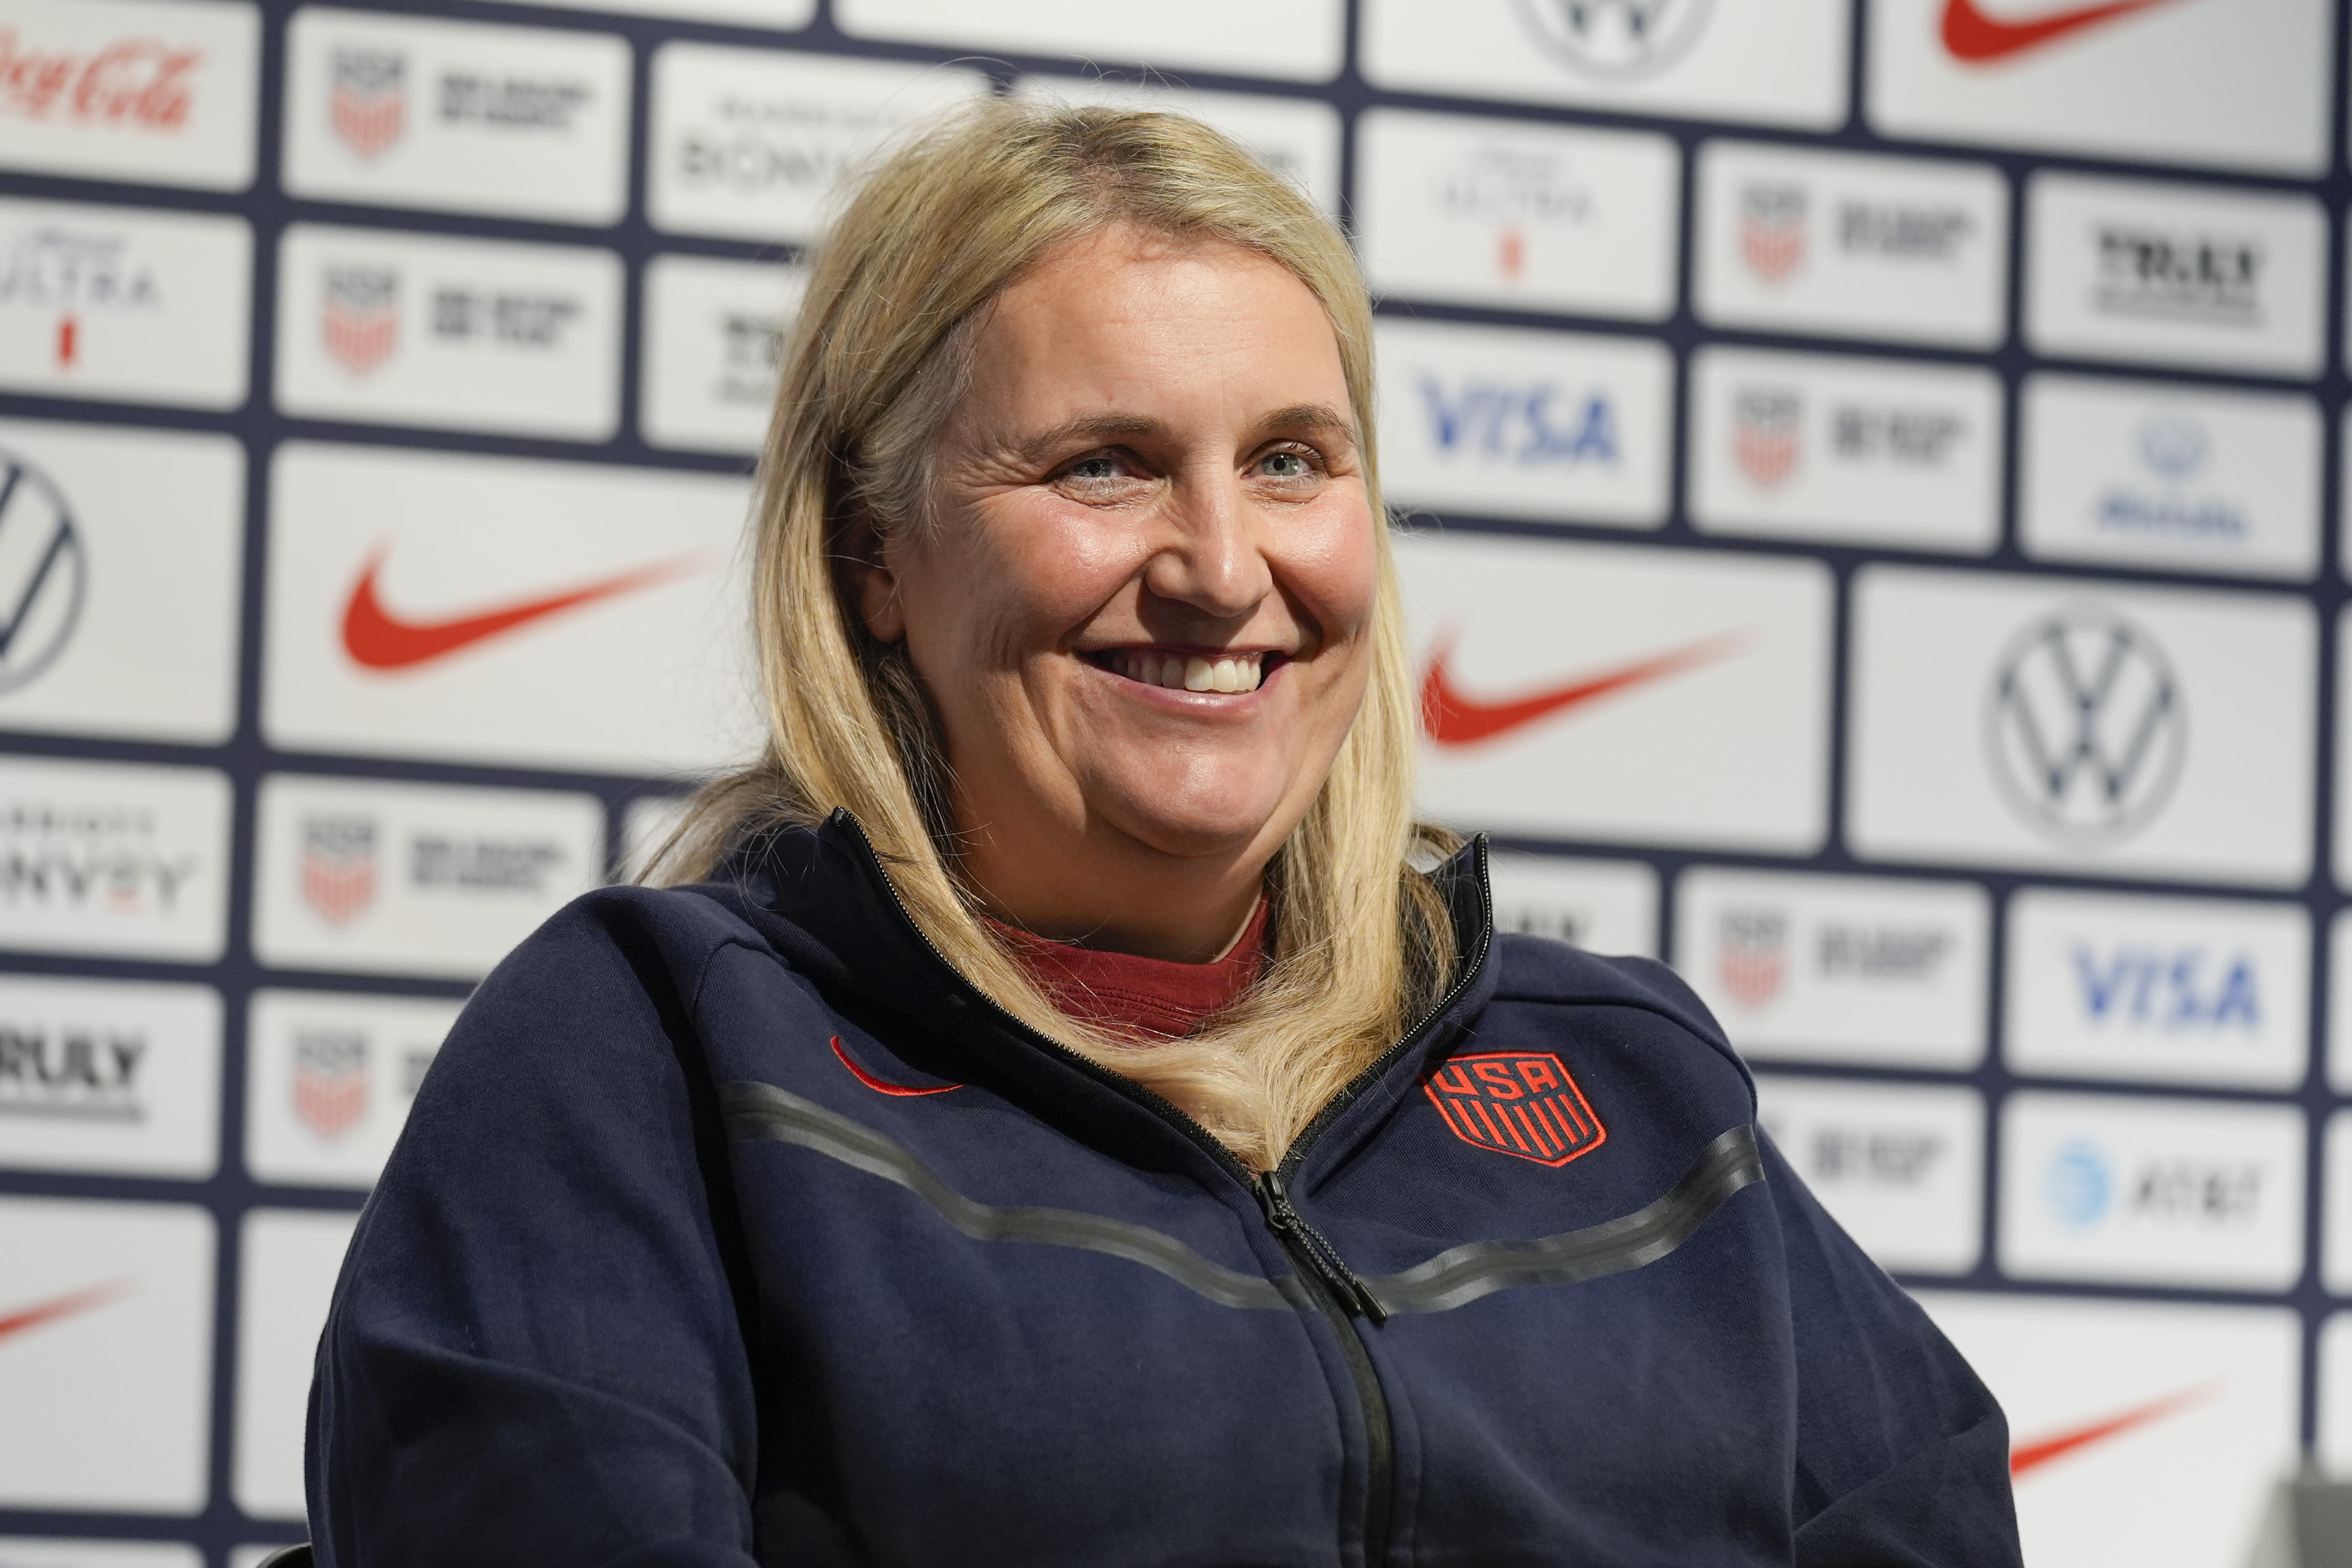 US women's coach Emma Hayes sidesteps equal pay question if high-priced star takes over American men